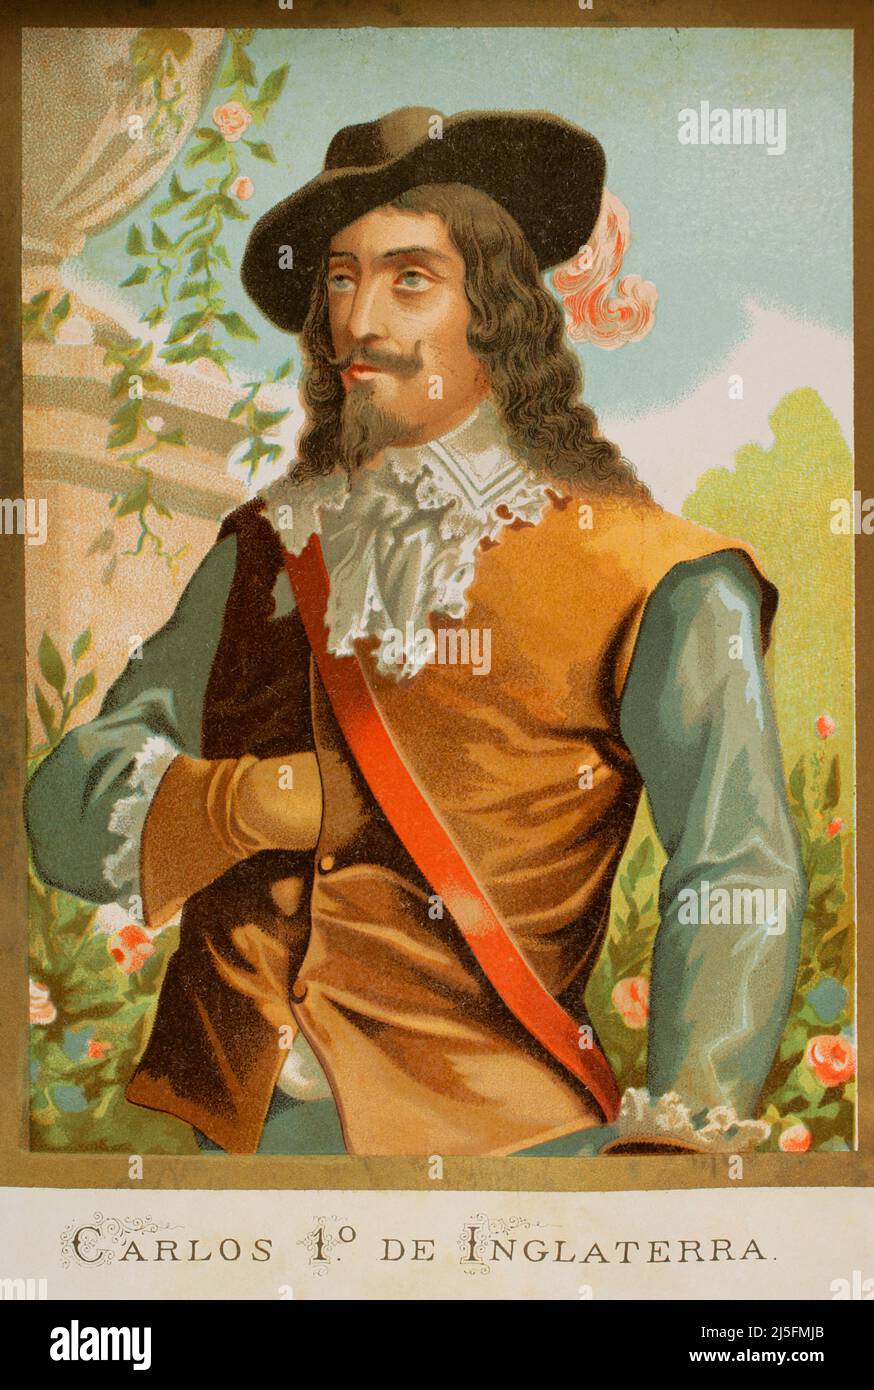 Charles I (1600-1649). King of England and Scotland (1625-1649). Portrait. Chromolithography. Historia Universal, by César Cantú. Volume VIII. Published in Barcelona, 1886. Stock Photo